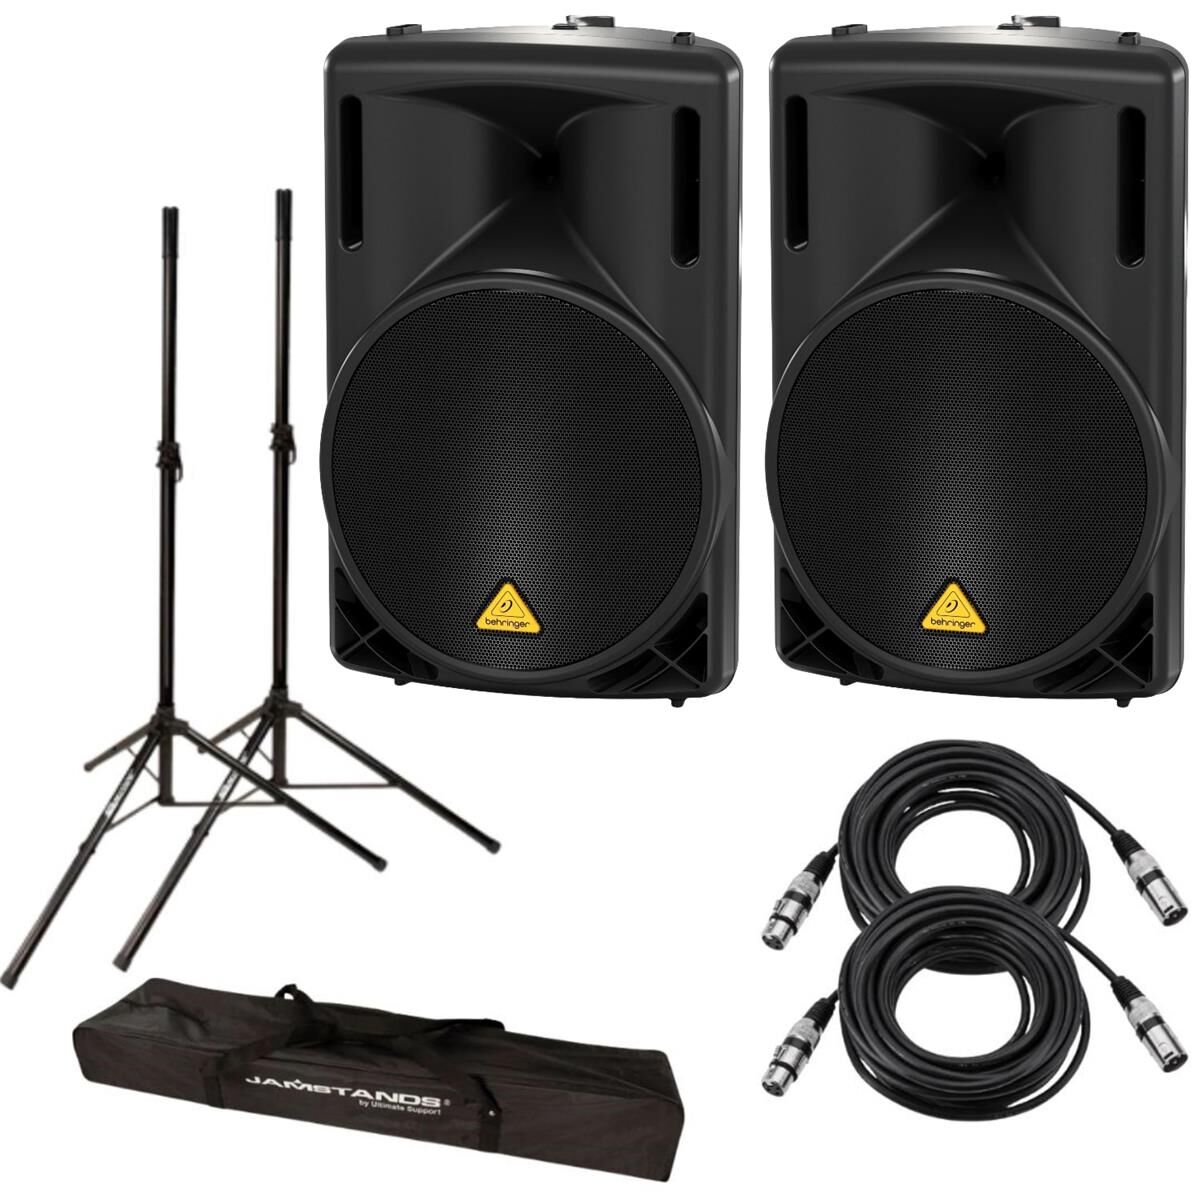 Behringer EUROLIVE 1000 Watts 2-Way Passive PA Speaker, W 2x Stands &amp; XLR Cables